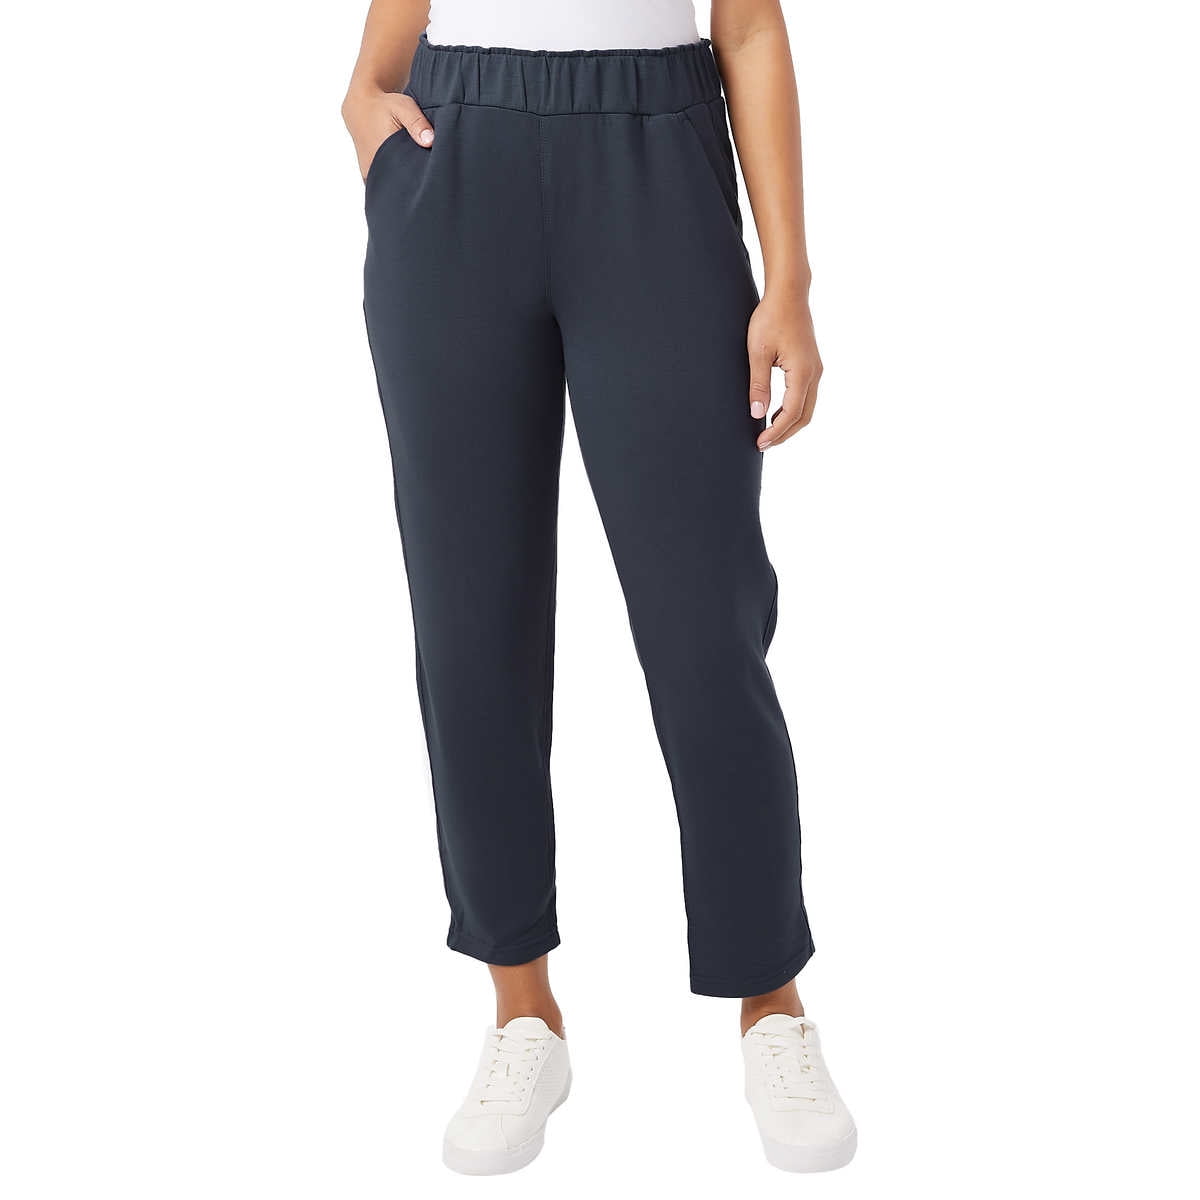 Blue 32° Degrees Cool Women's soft comfort pull-on ankle length travel pants